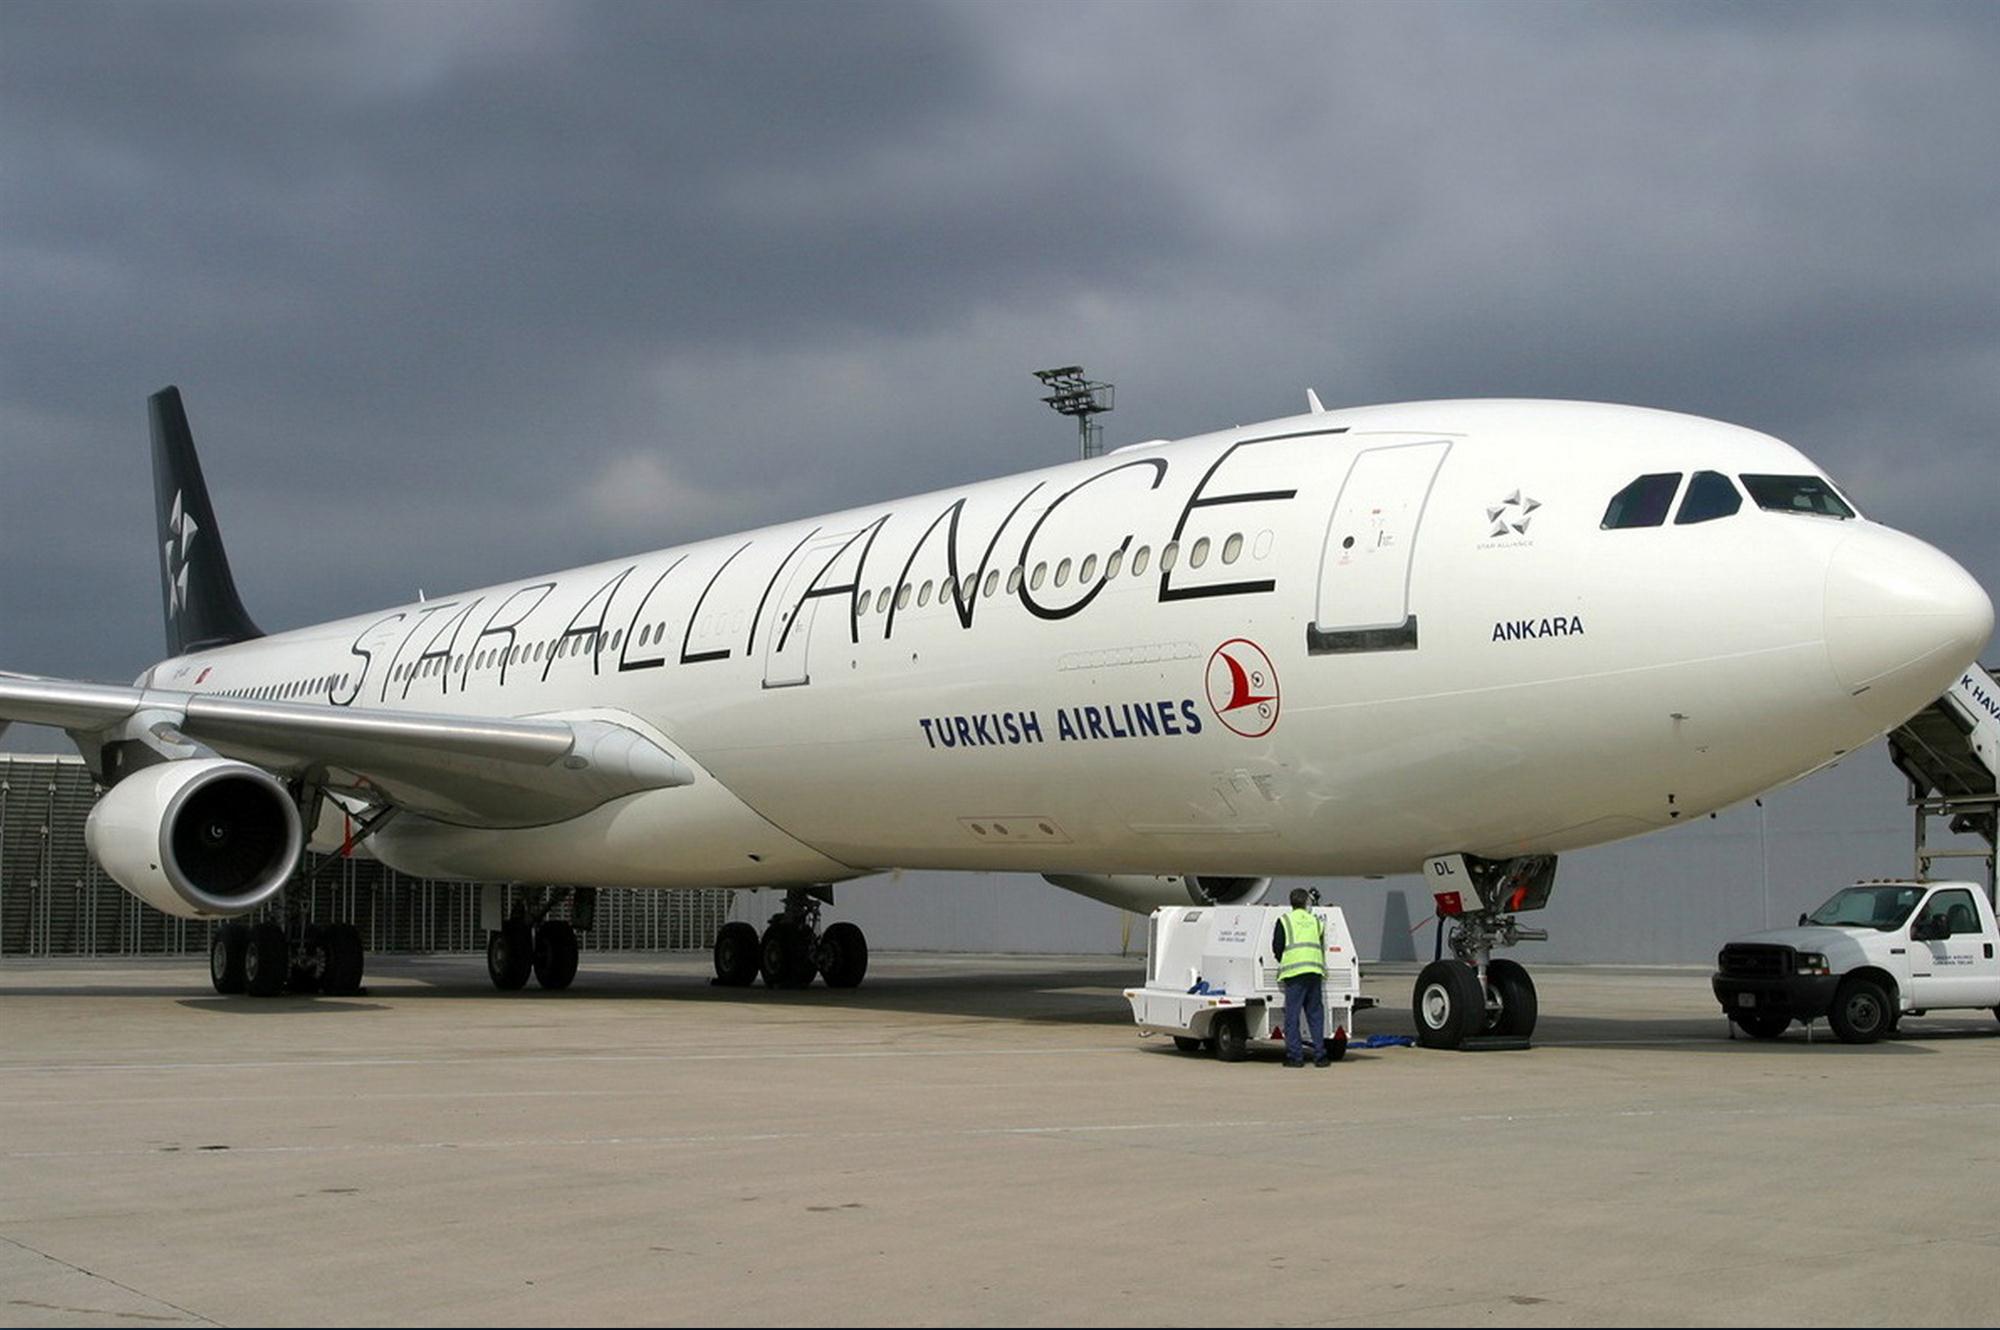 Self Photos / Files - Star Alliance Turkish Airlines A340